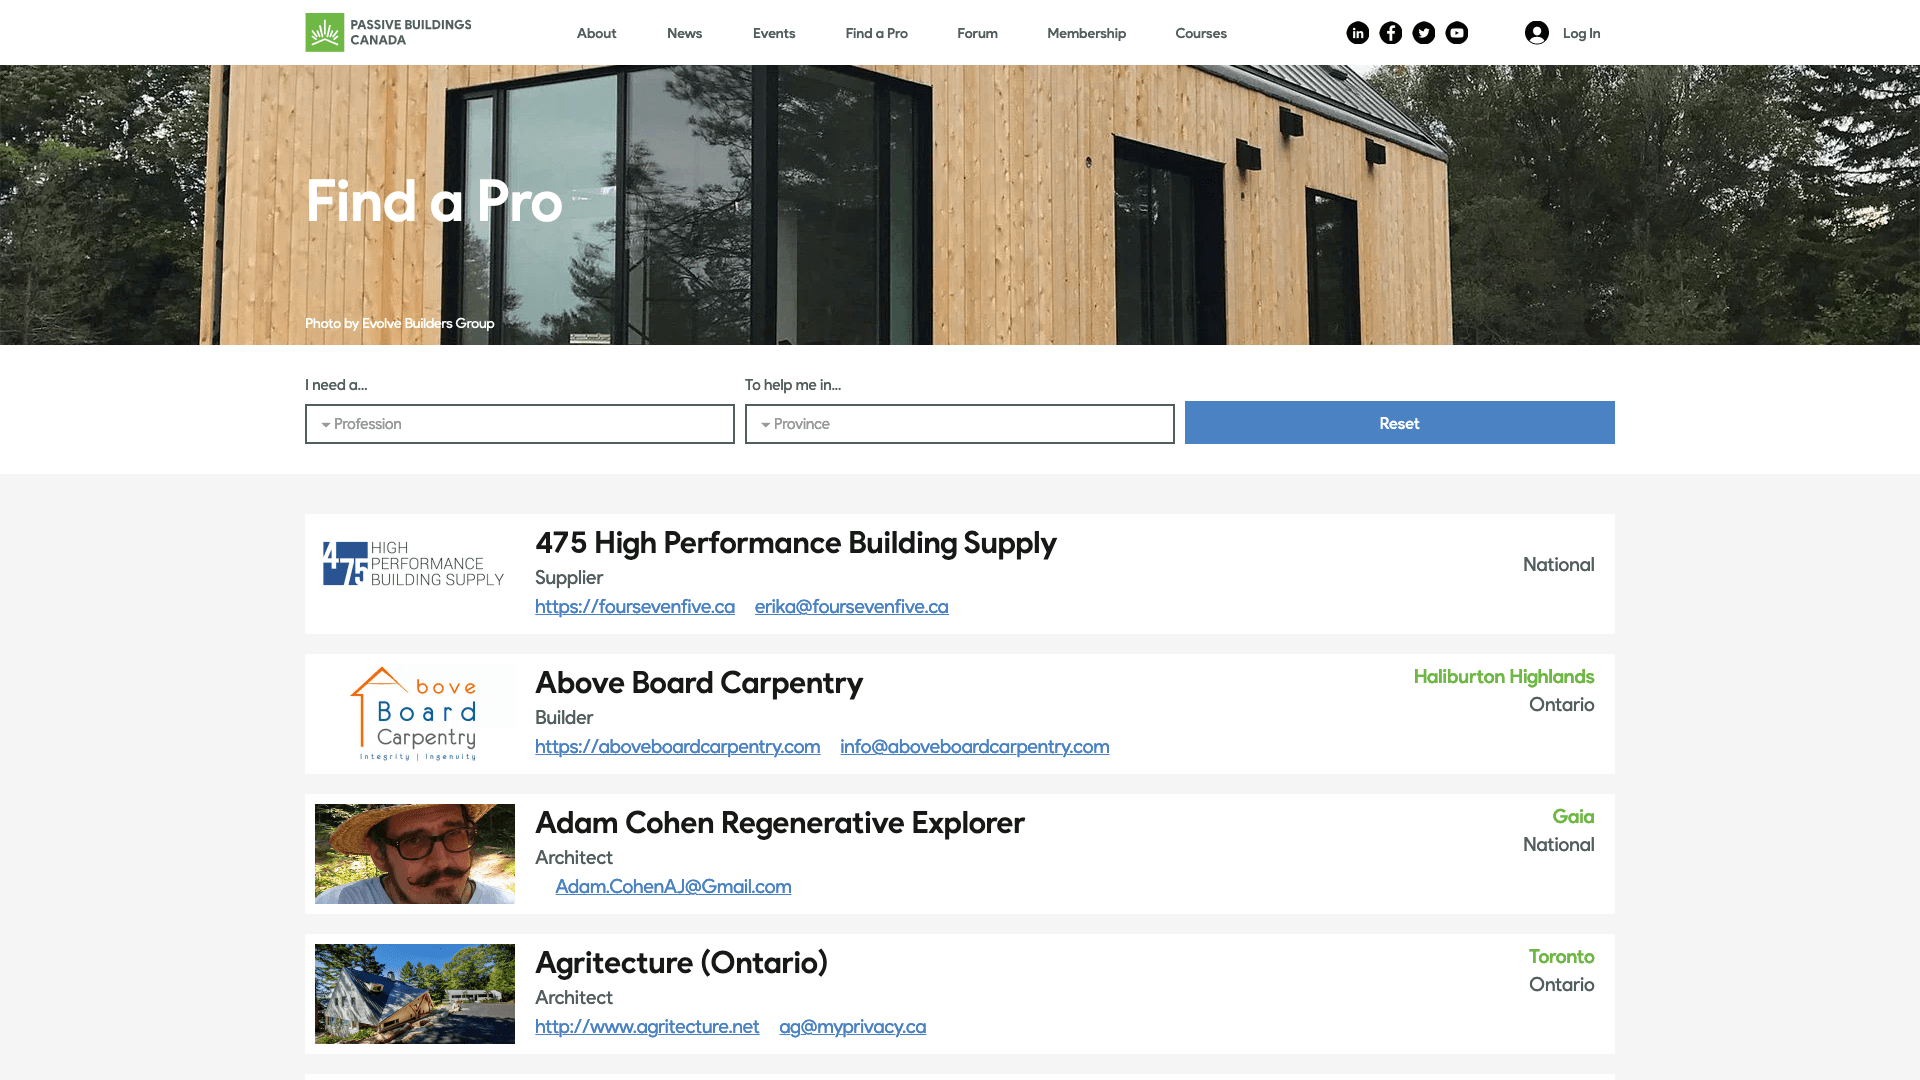 The "Find A Pro" page with a sortable list of building supply companies